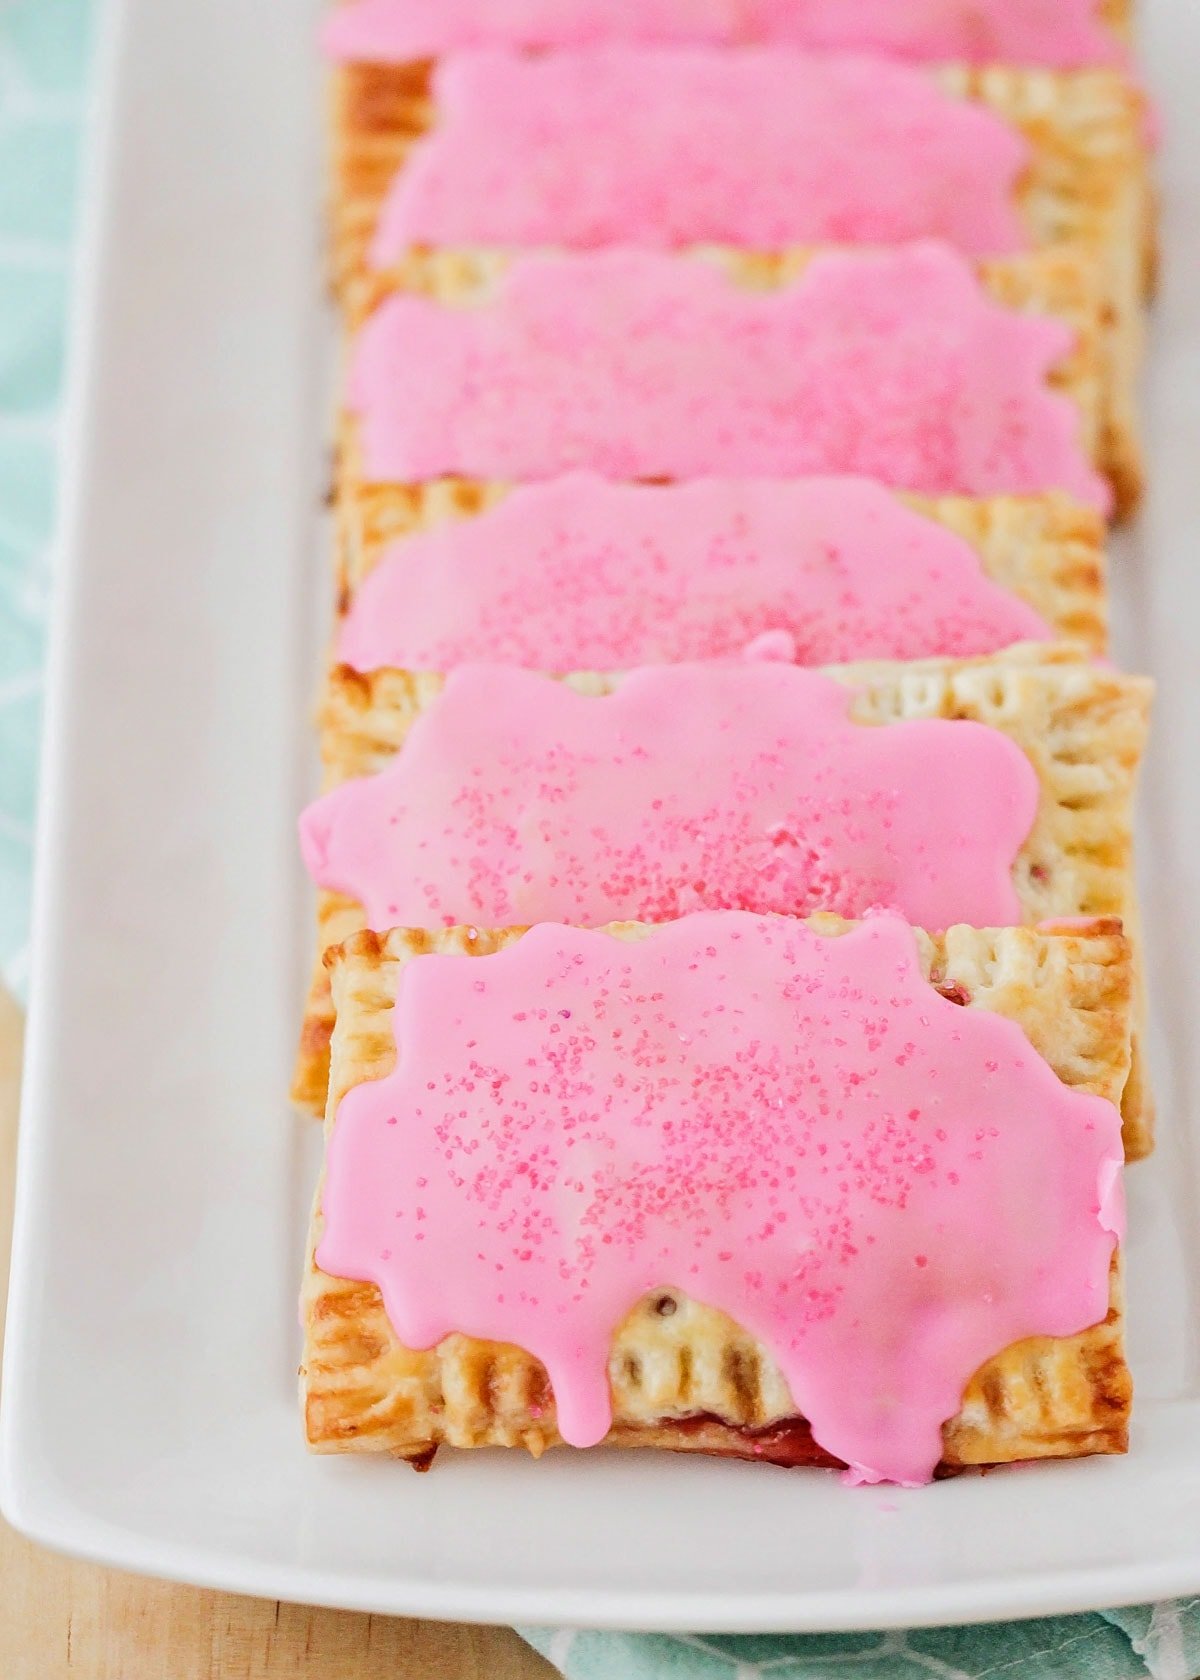 Homemade pop tarts with strawberry frosting on top.